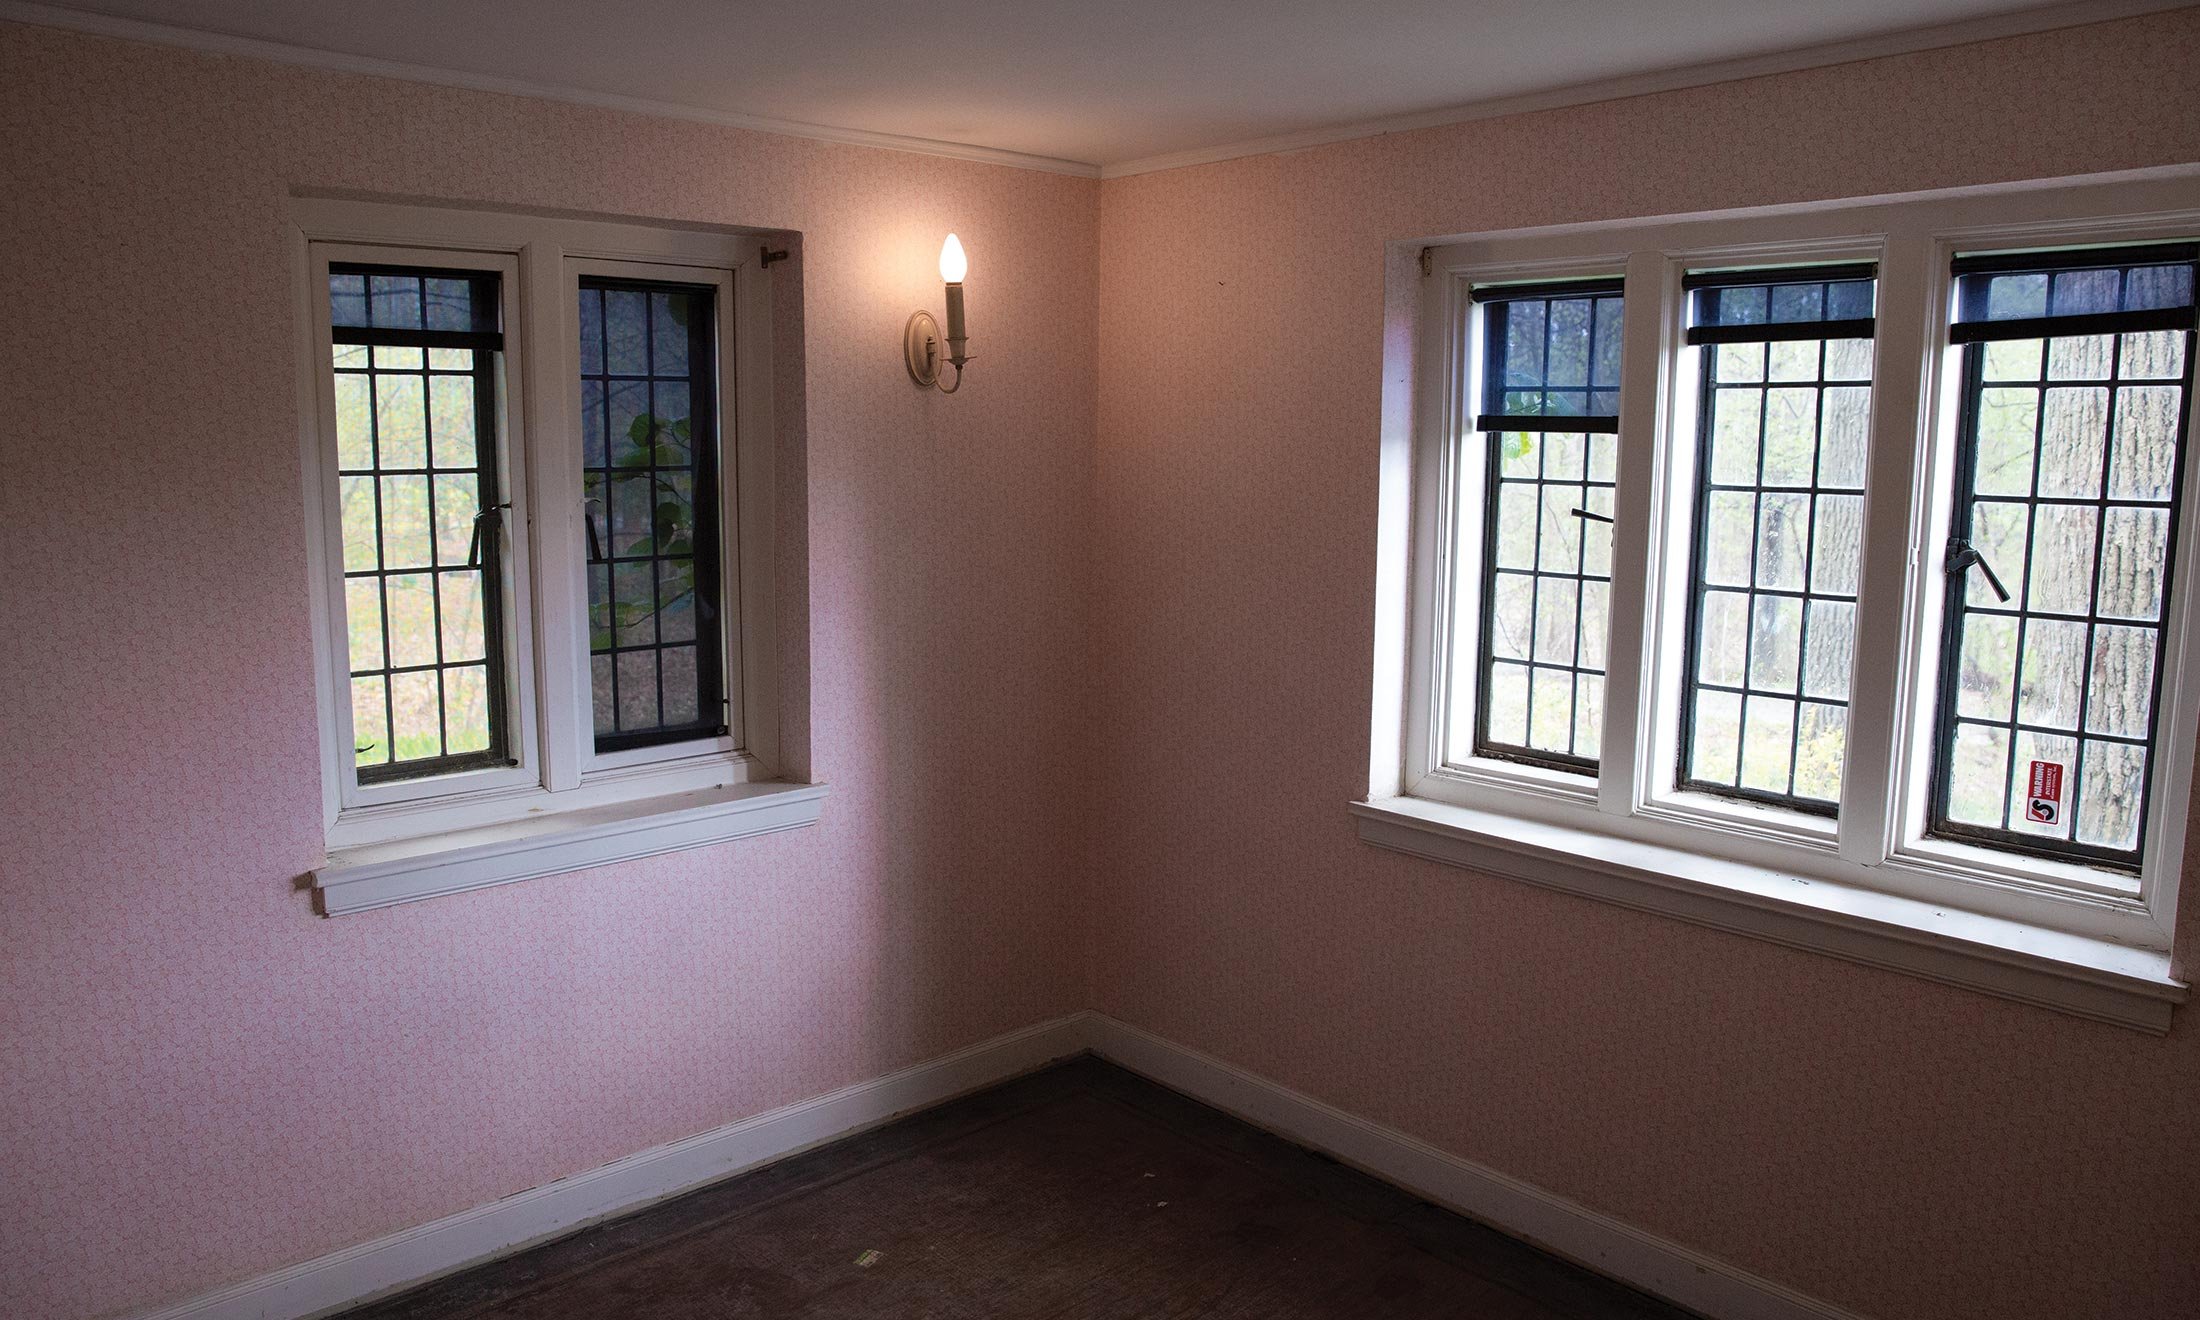 Inside a room under construction in Knole Cottage on the grounds of the Meadow Brook Estate